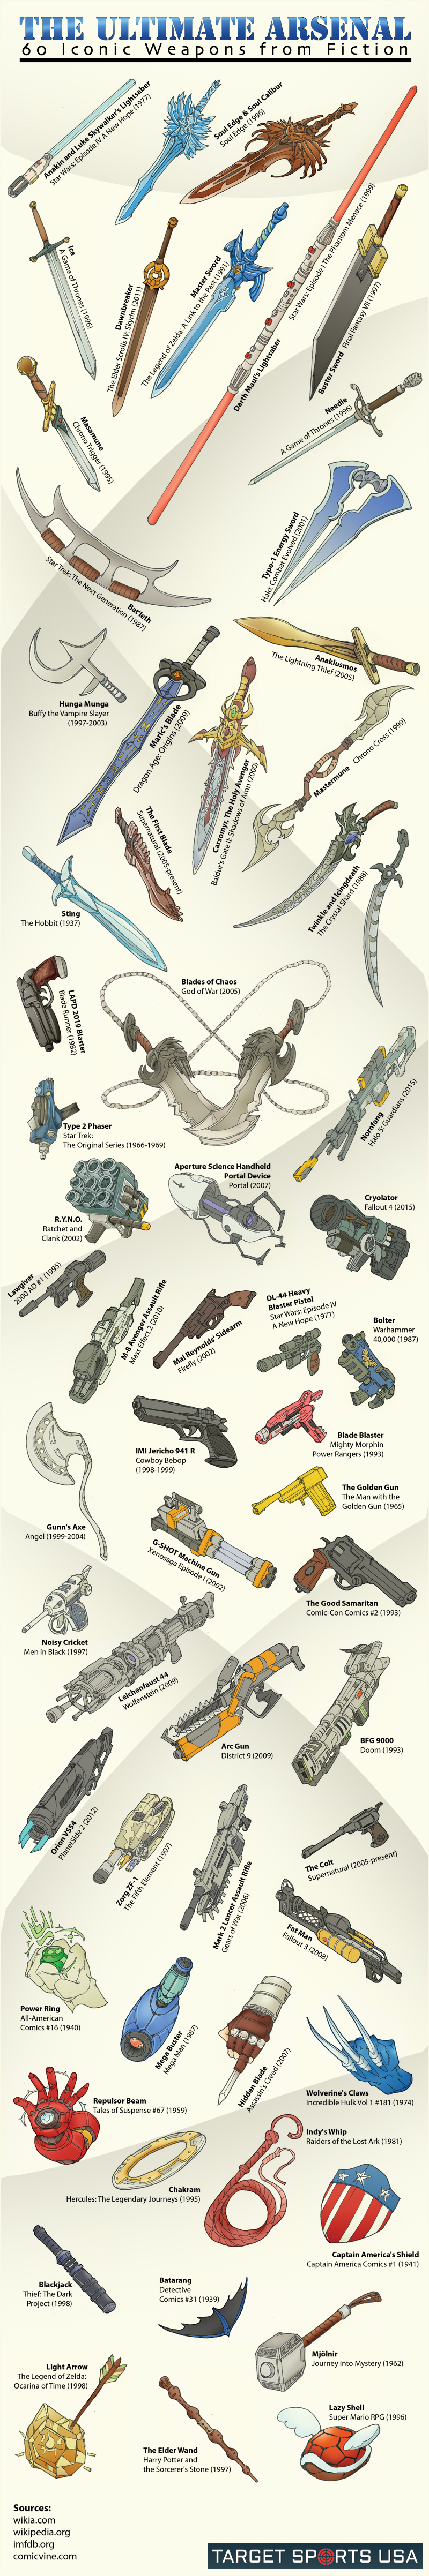 The Ultimate Arsenal: 60 Iconic Weapons from Fiction - TargetSportsUSA.com - Infographic